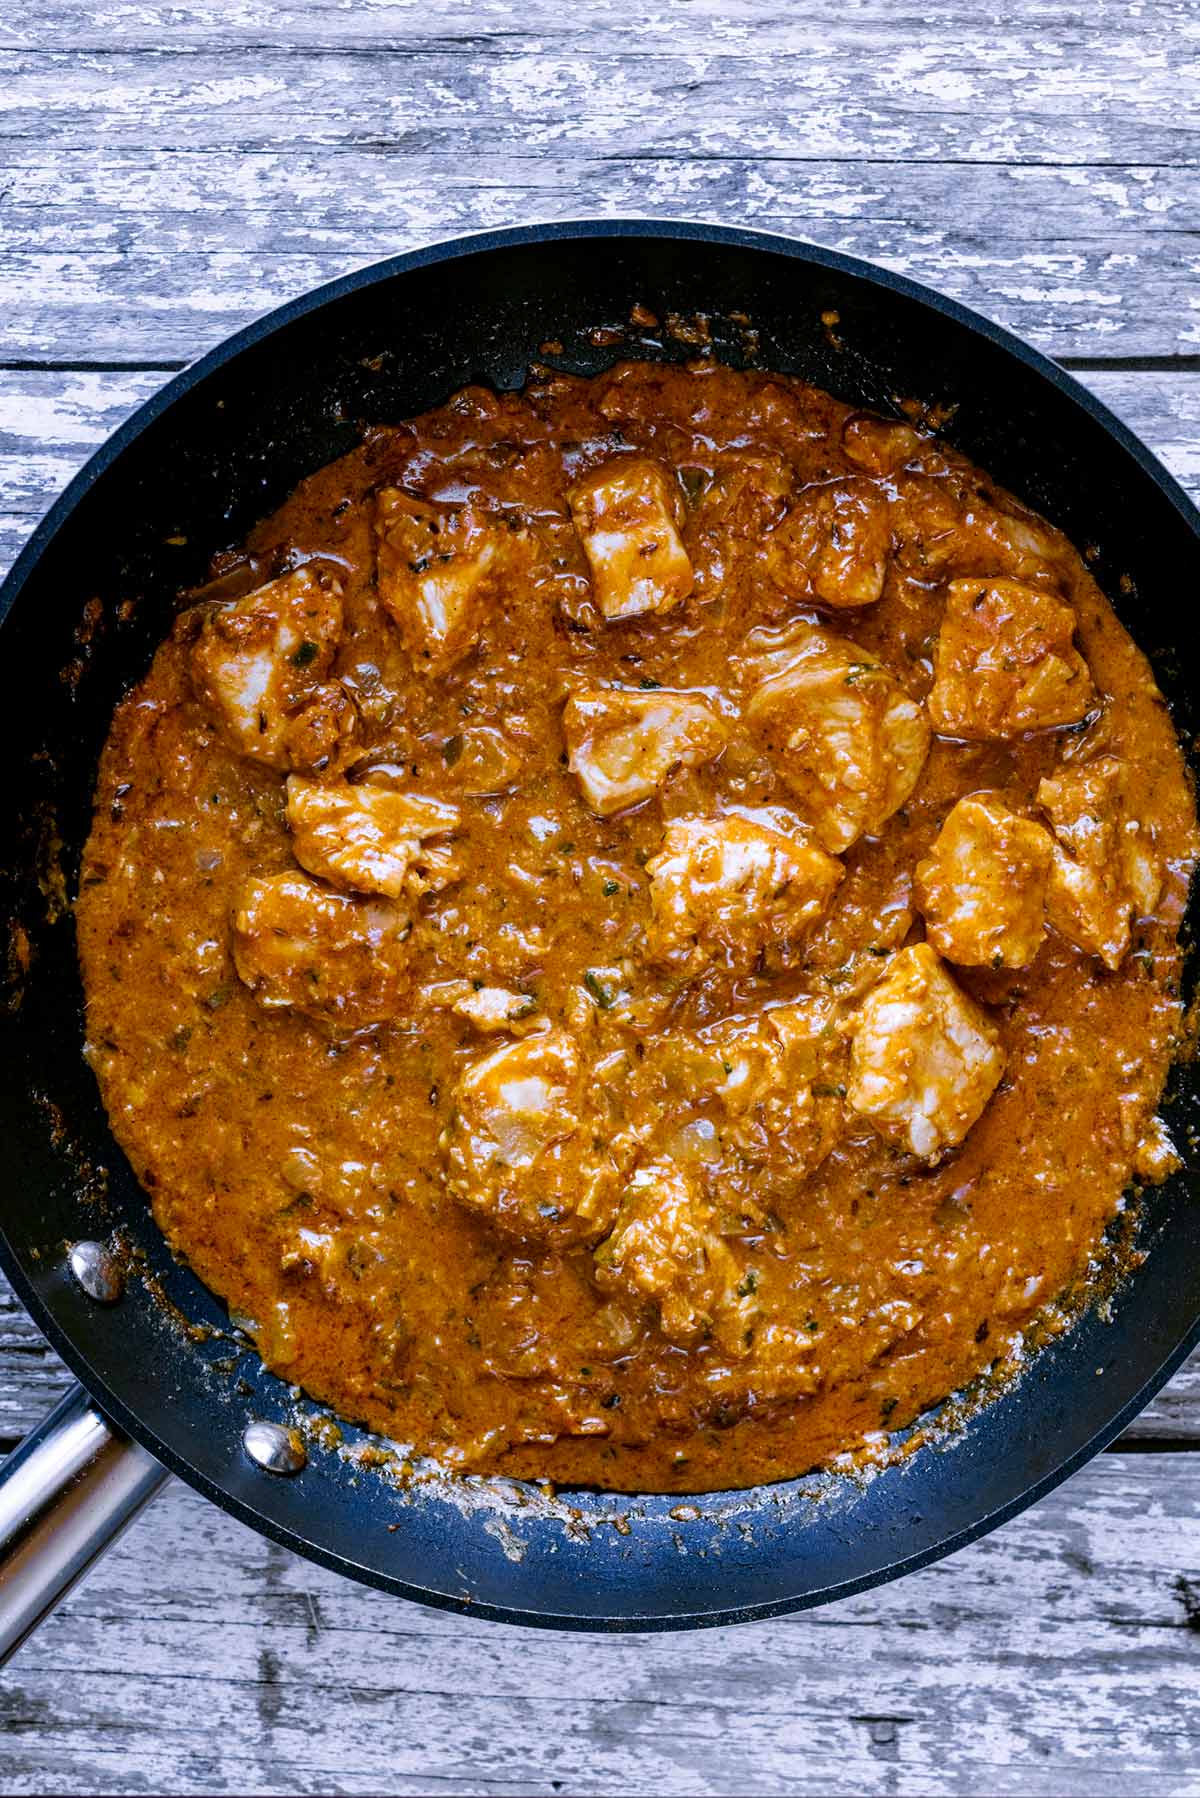 Chicken cooking in a korma sauce.